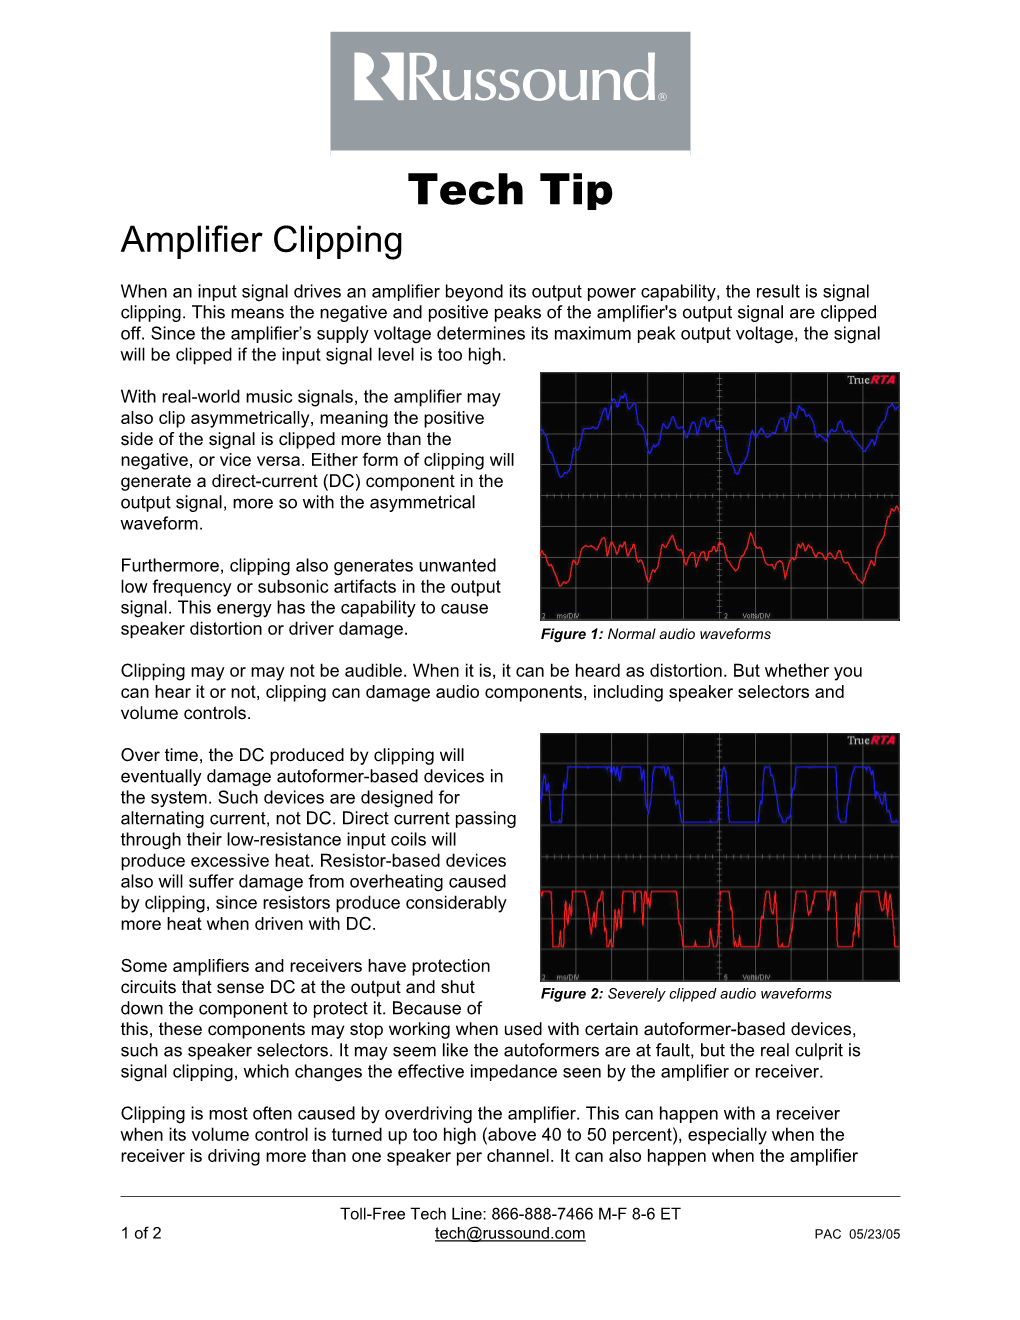 Russound Amplifier Clipping Tips